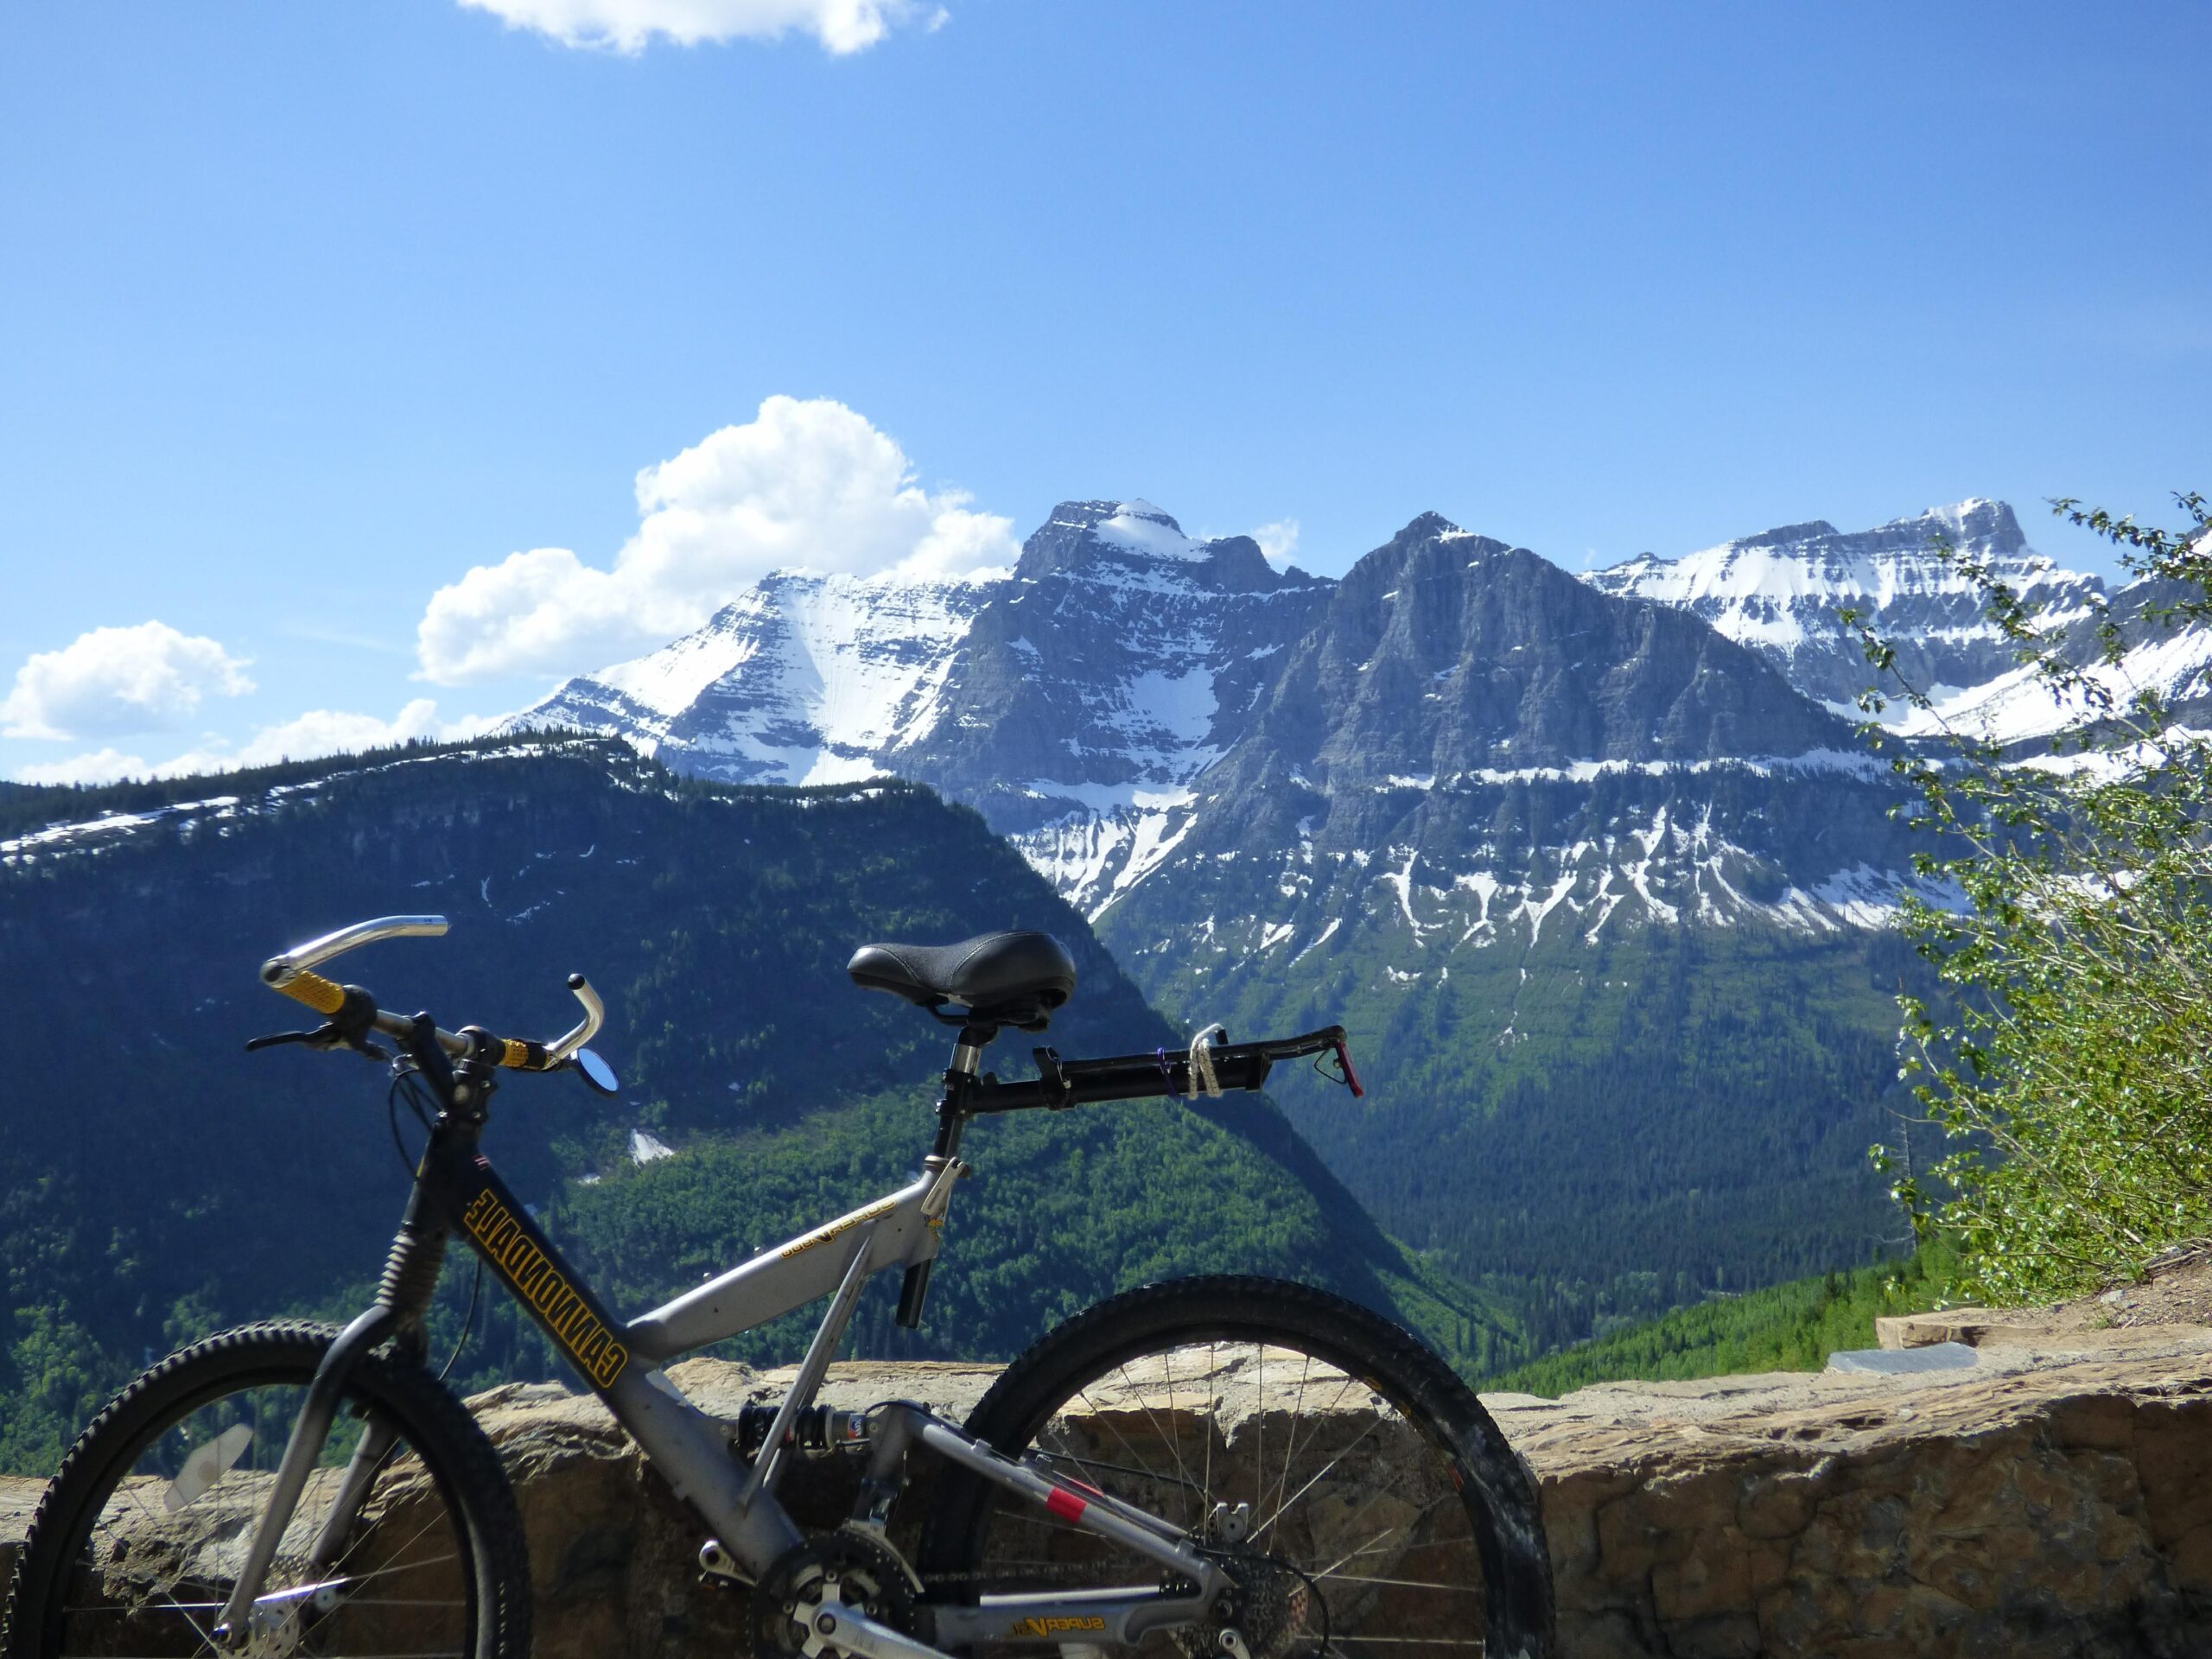 Bike parked beside Going-to-the-sun road with mountain in background